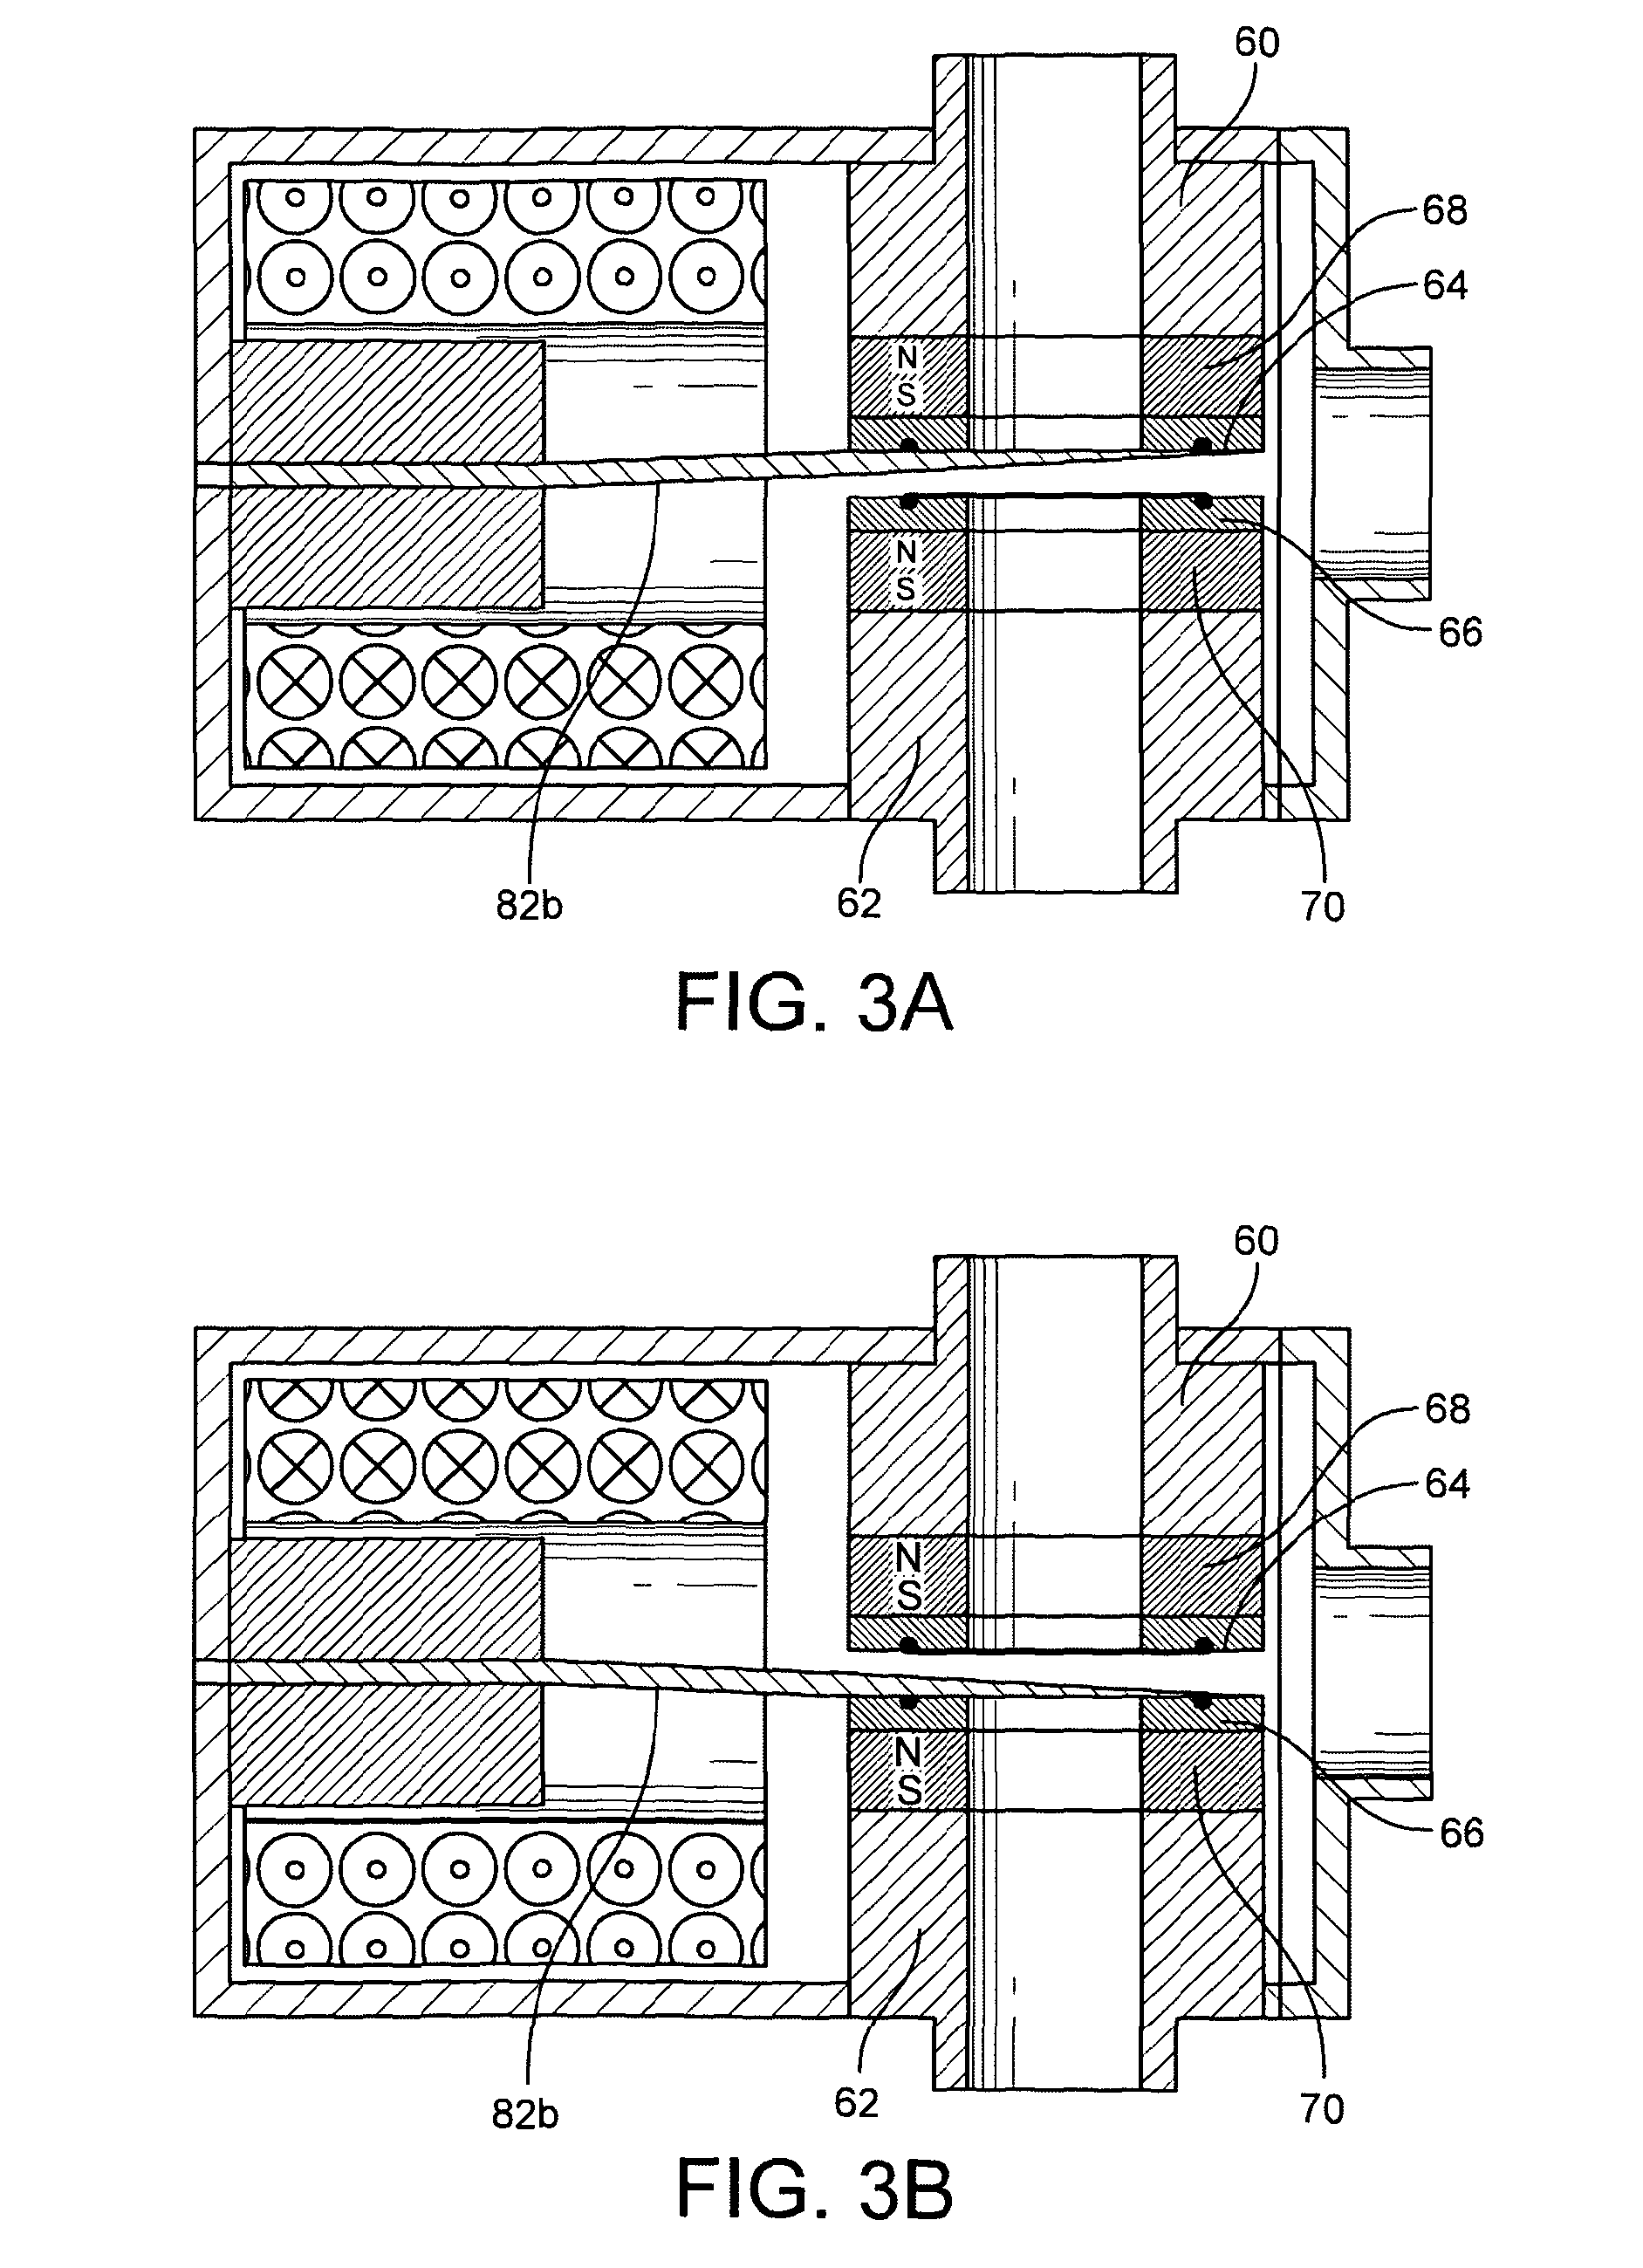 Electromagnetically Operated Switching Devices And Methods Of Actuation Thereof